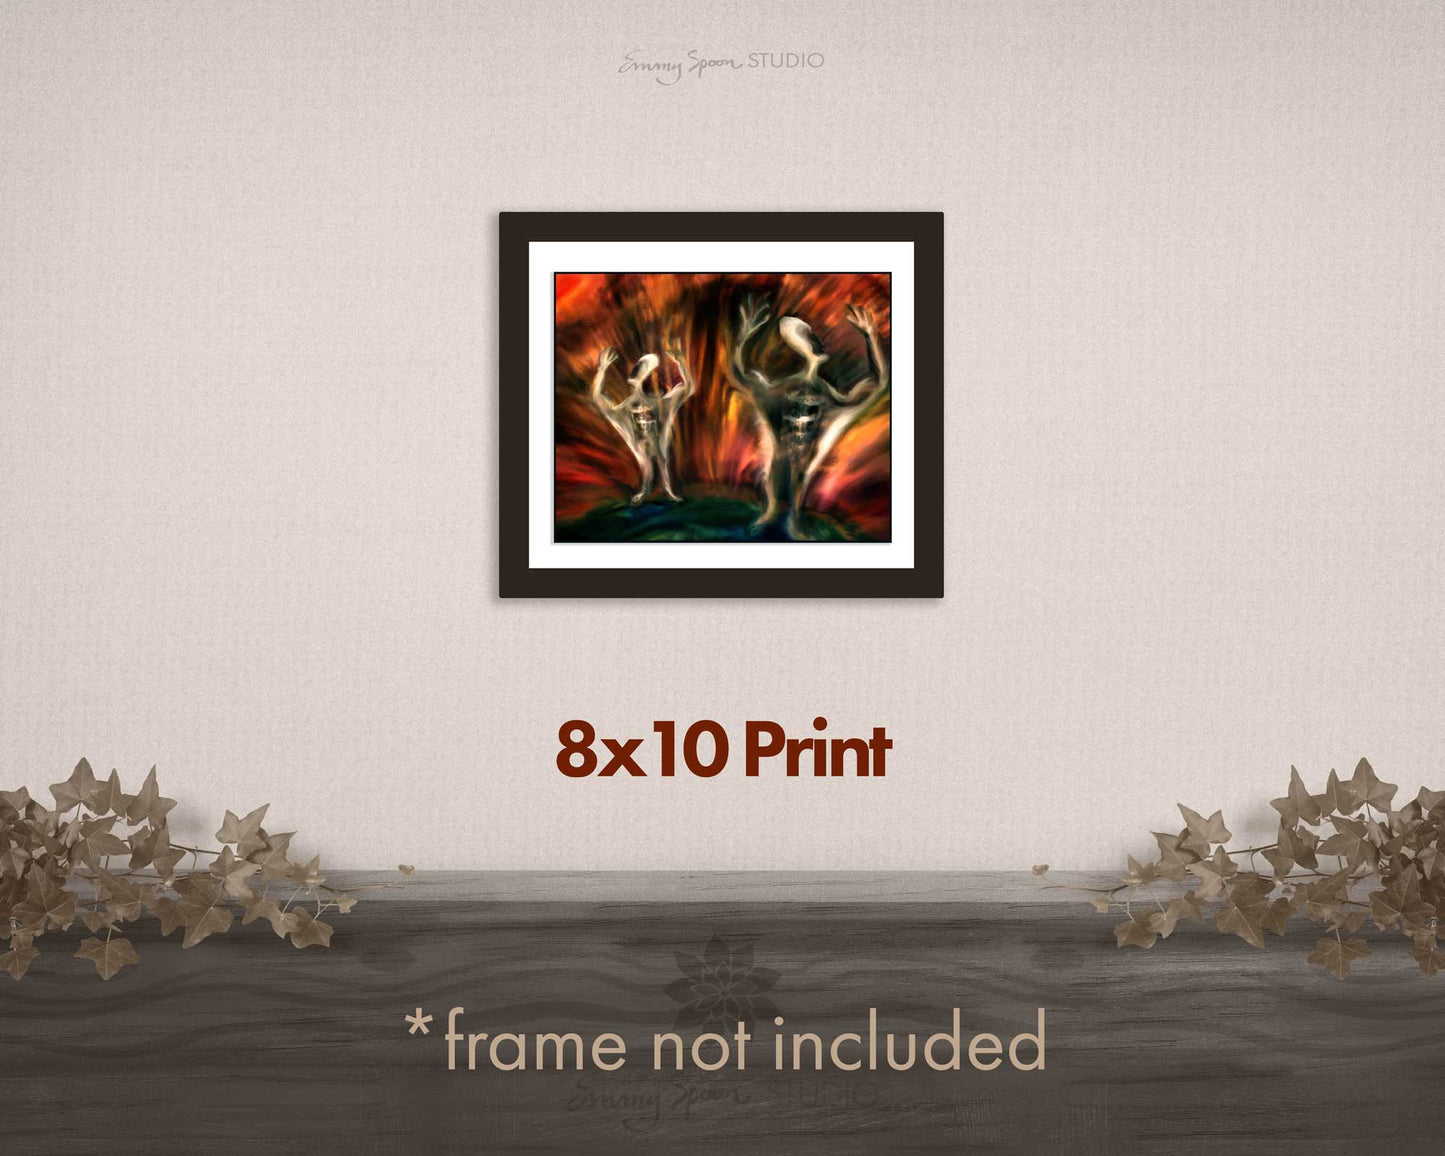 Bang 2012 Original Giclée Art Prints by Emmy Spoon 8x10 print *frame not included